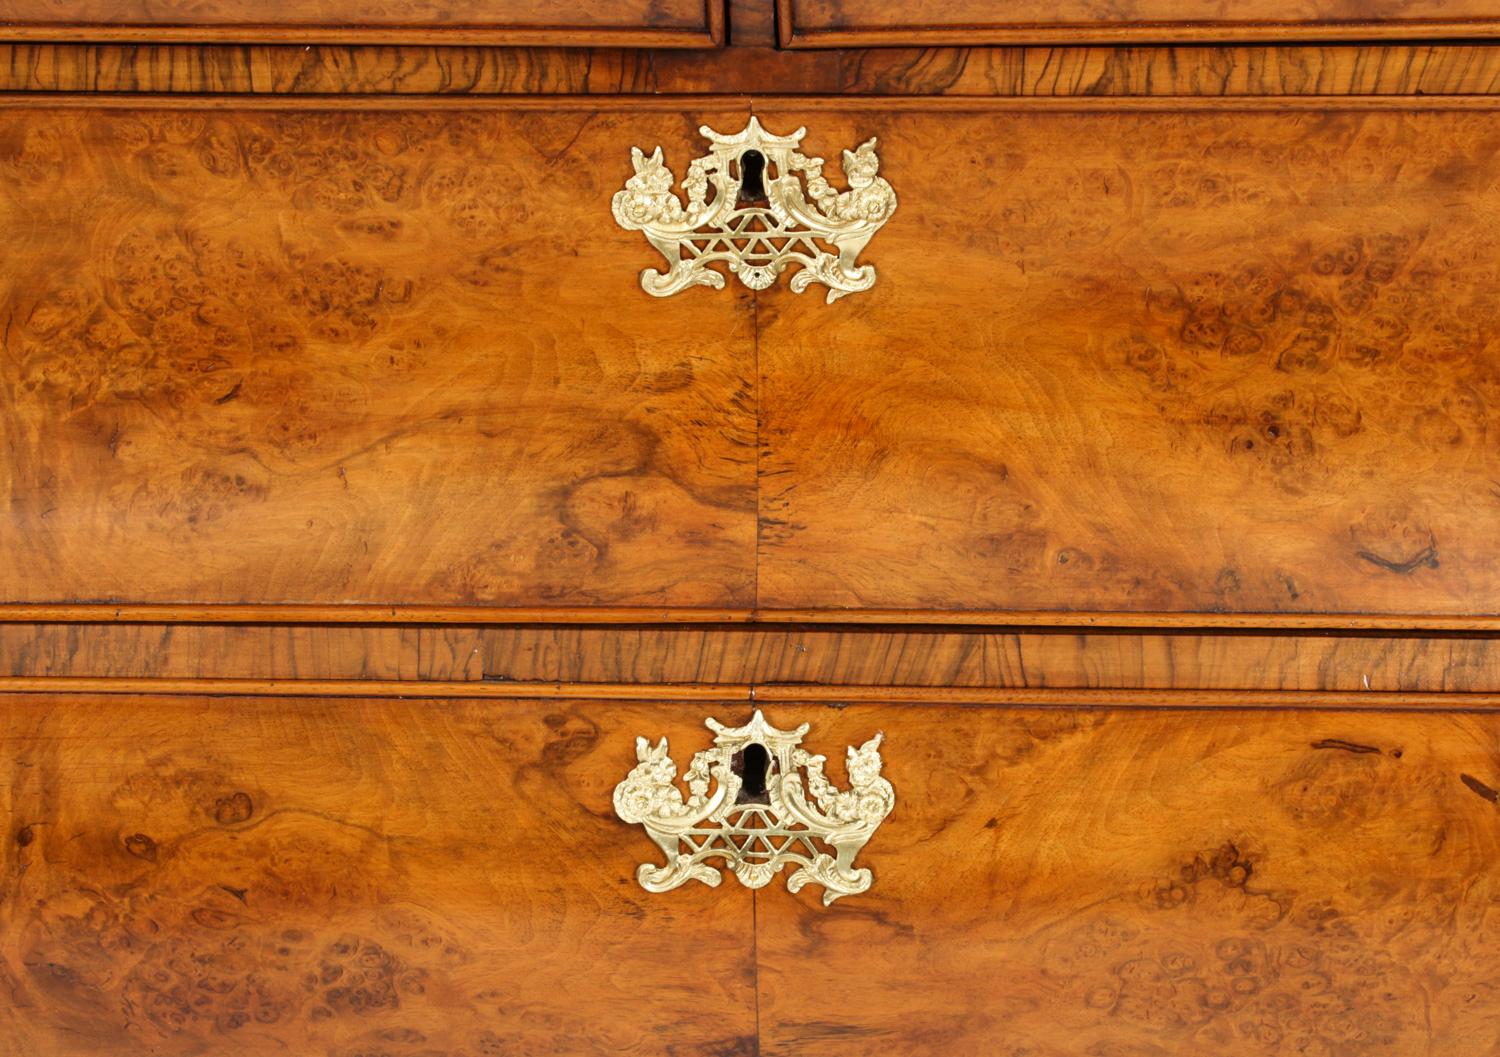 This is a superb antique Dutch Rococo burr walnut bombé Armoire, circa 1780 in date. 
 
It has been accomplished in stupendous burr walnut with masterfully hand carved mouldings. The drawer linings are of solid oak, it stands on its original hand